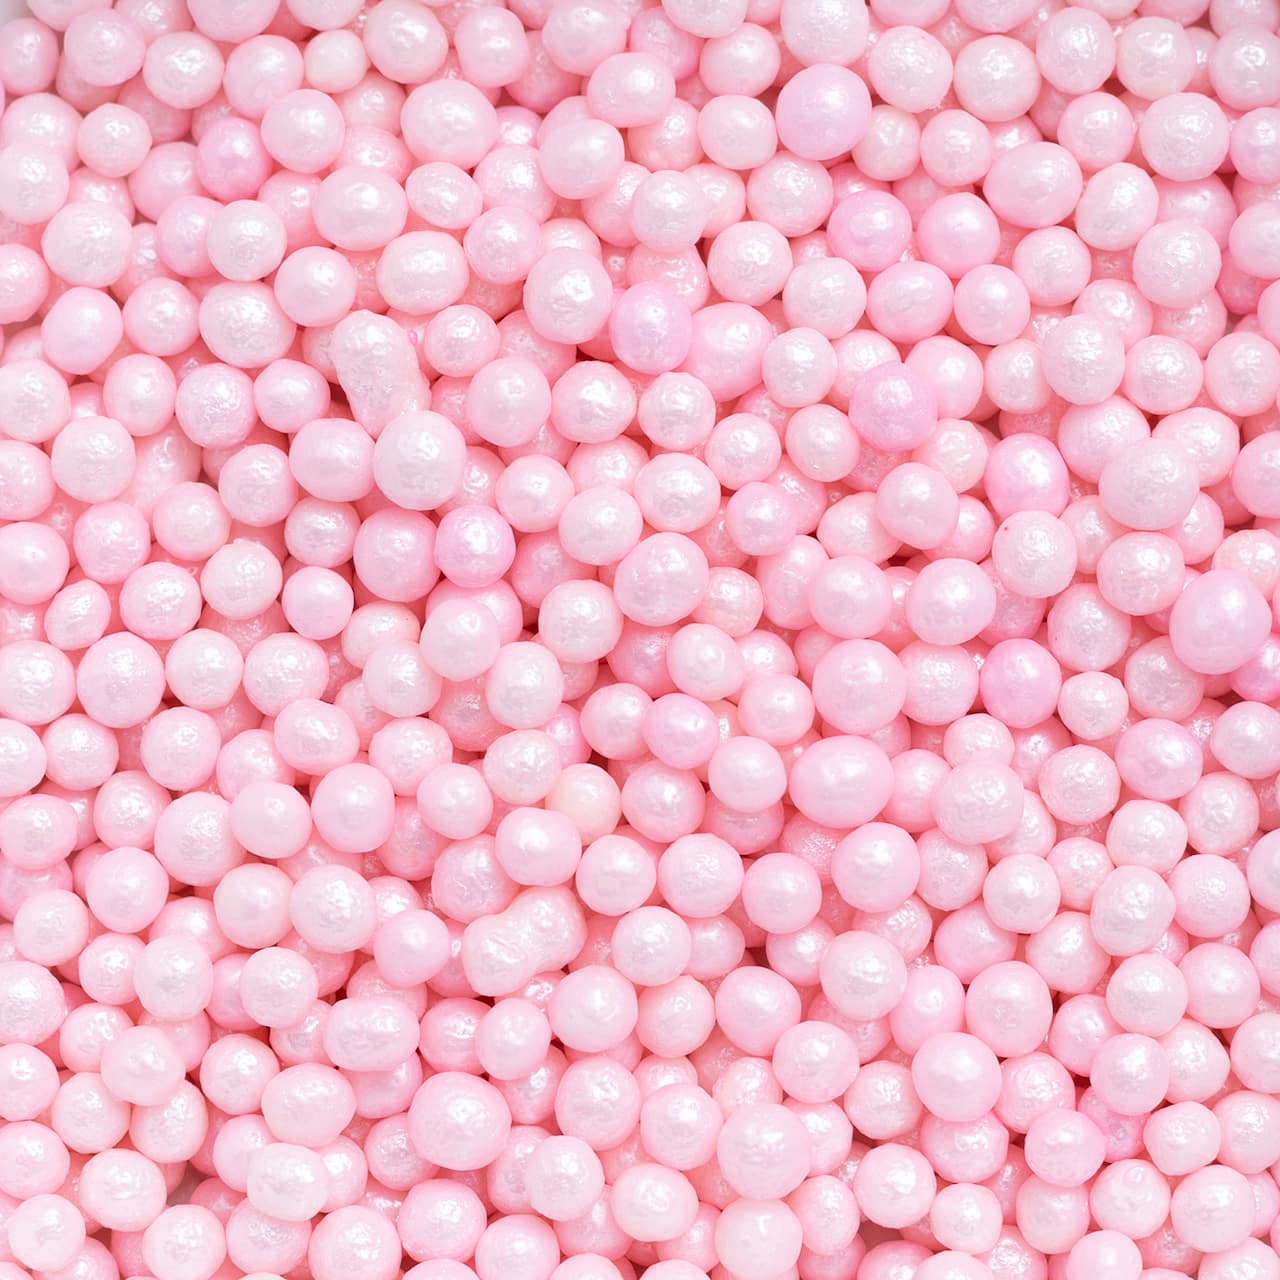 Sweet Tooth Fairy&#xAE; Candy Pearls, 4oz.